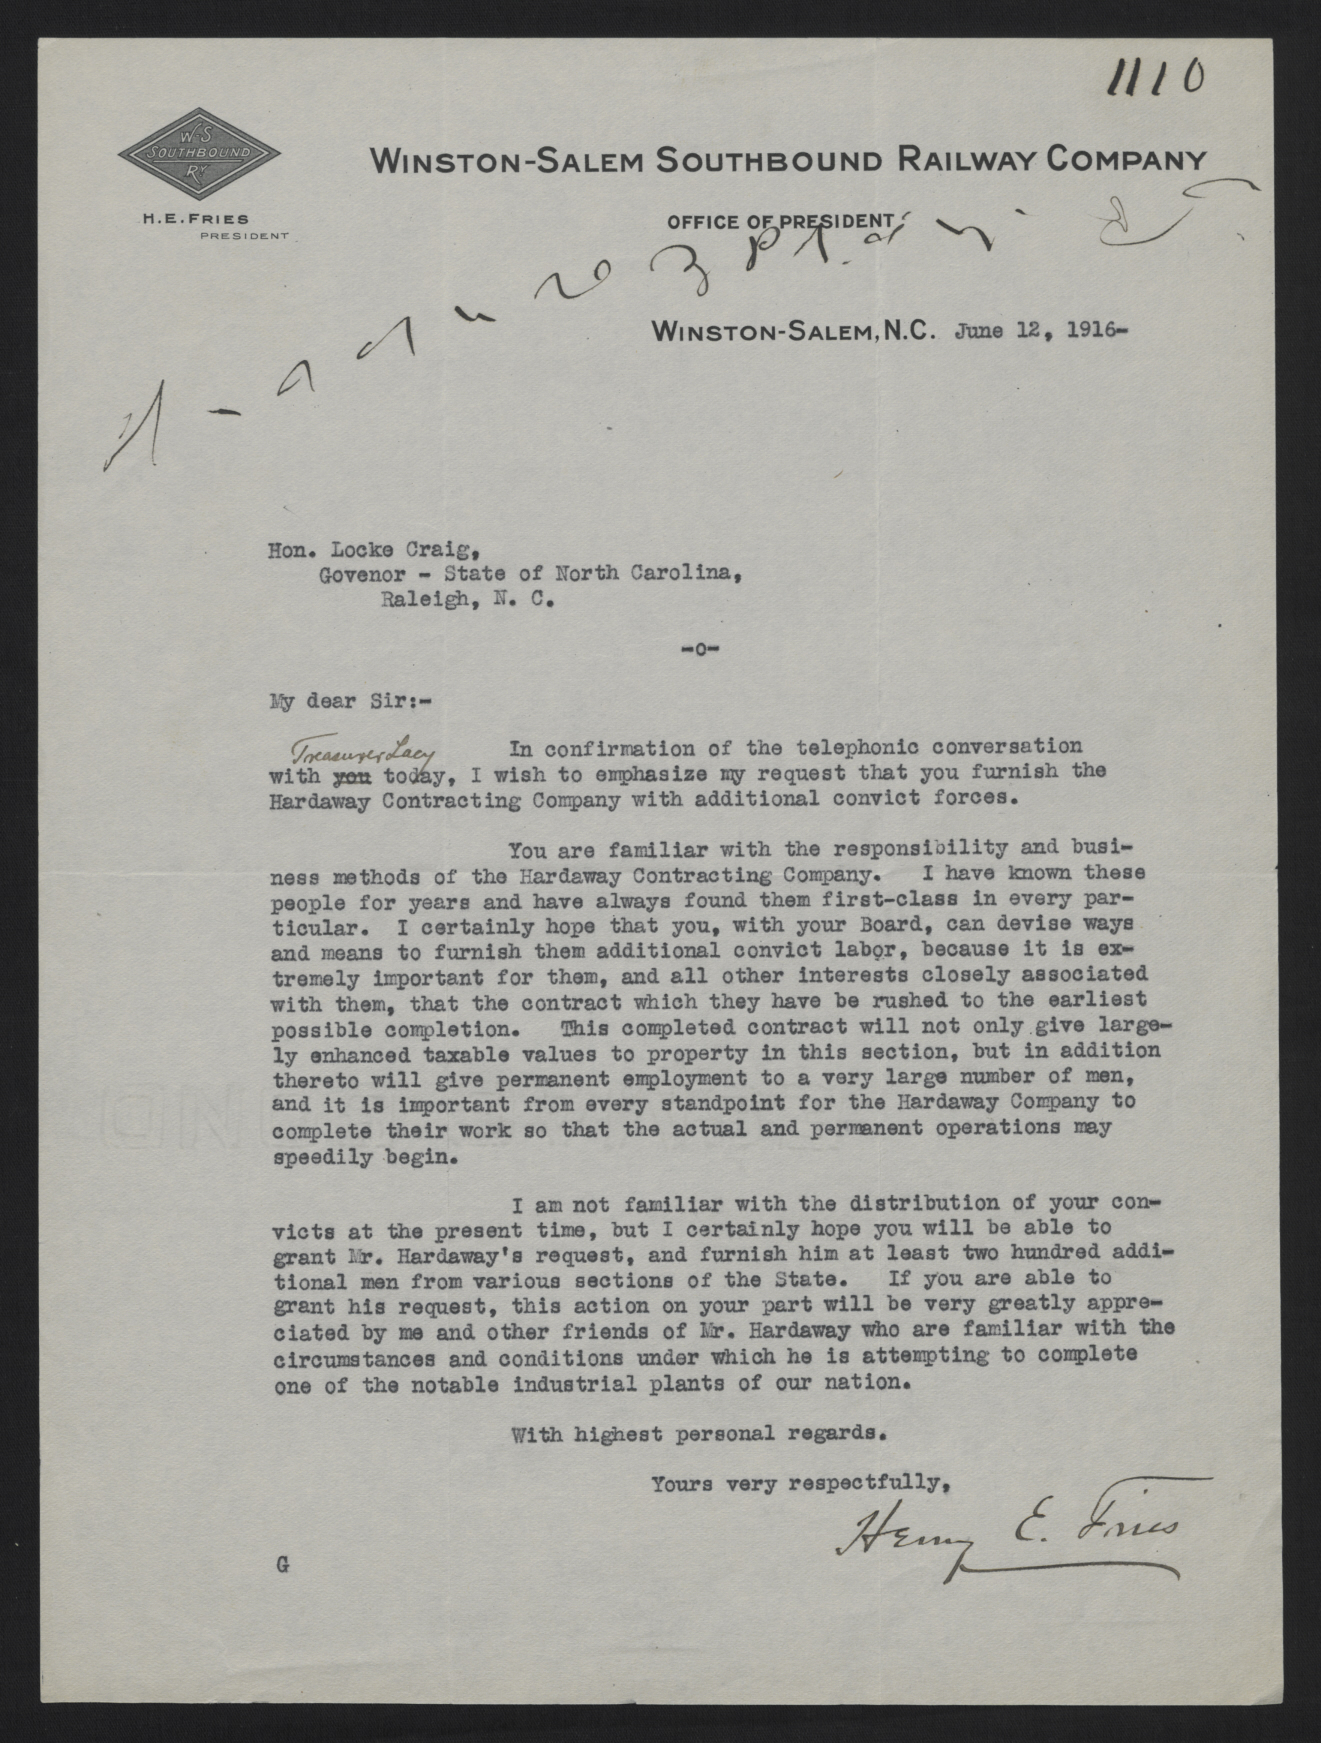 Letter from Fries to Craig, June 12, 1916